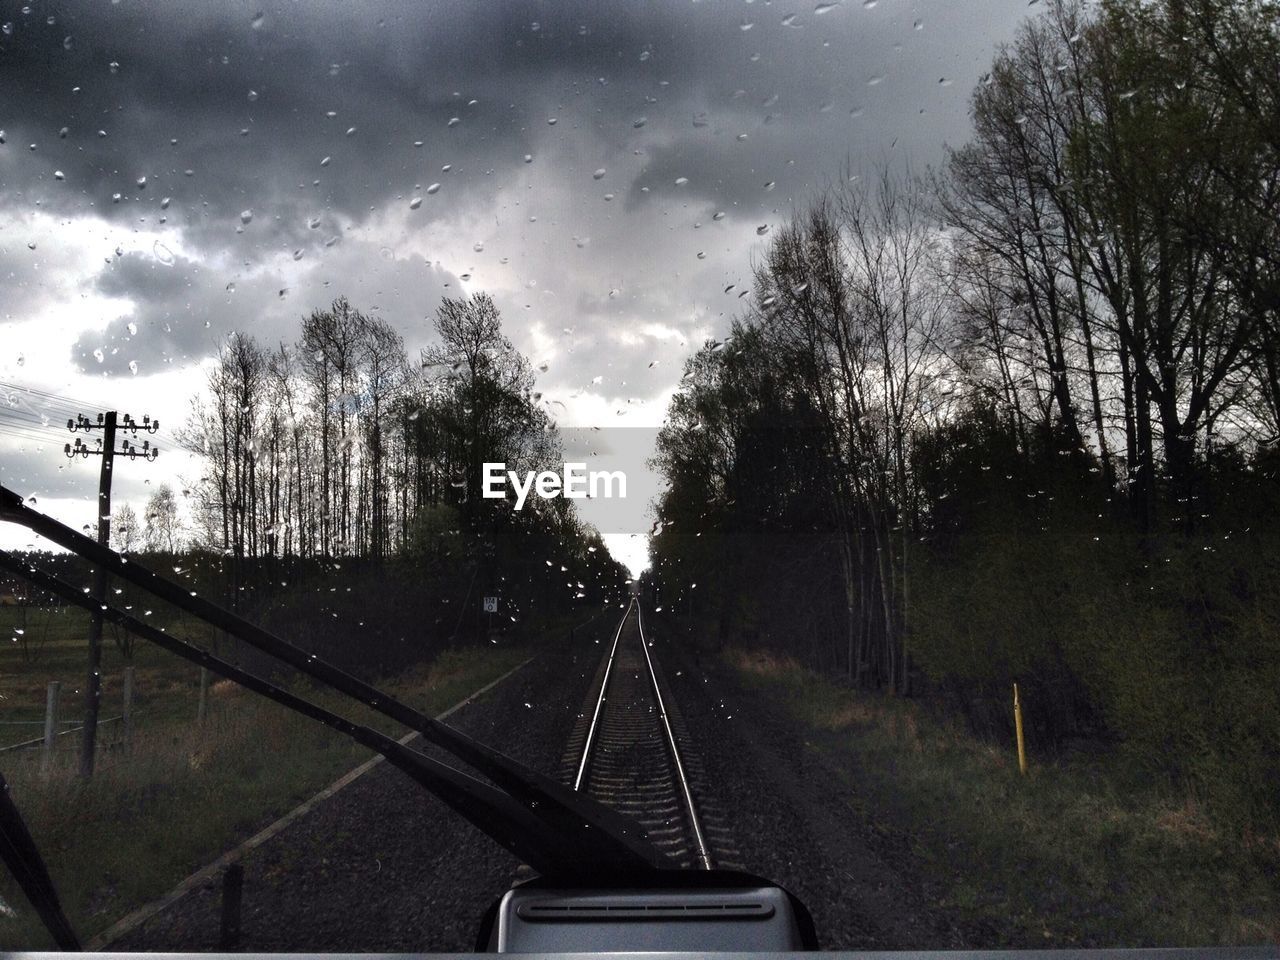 Railroad track amidst forest against cloudy sky in monsoon seen through train windshield